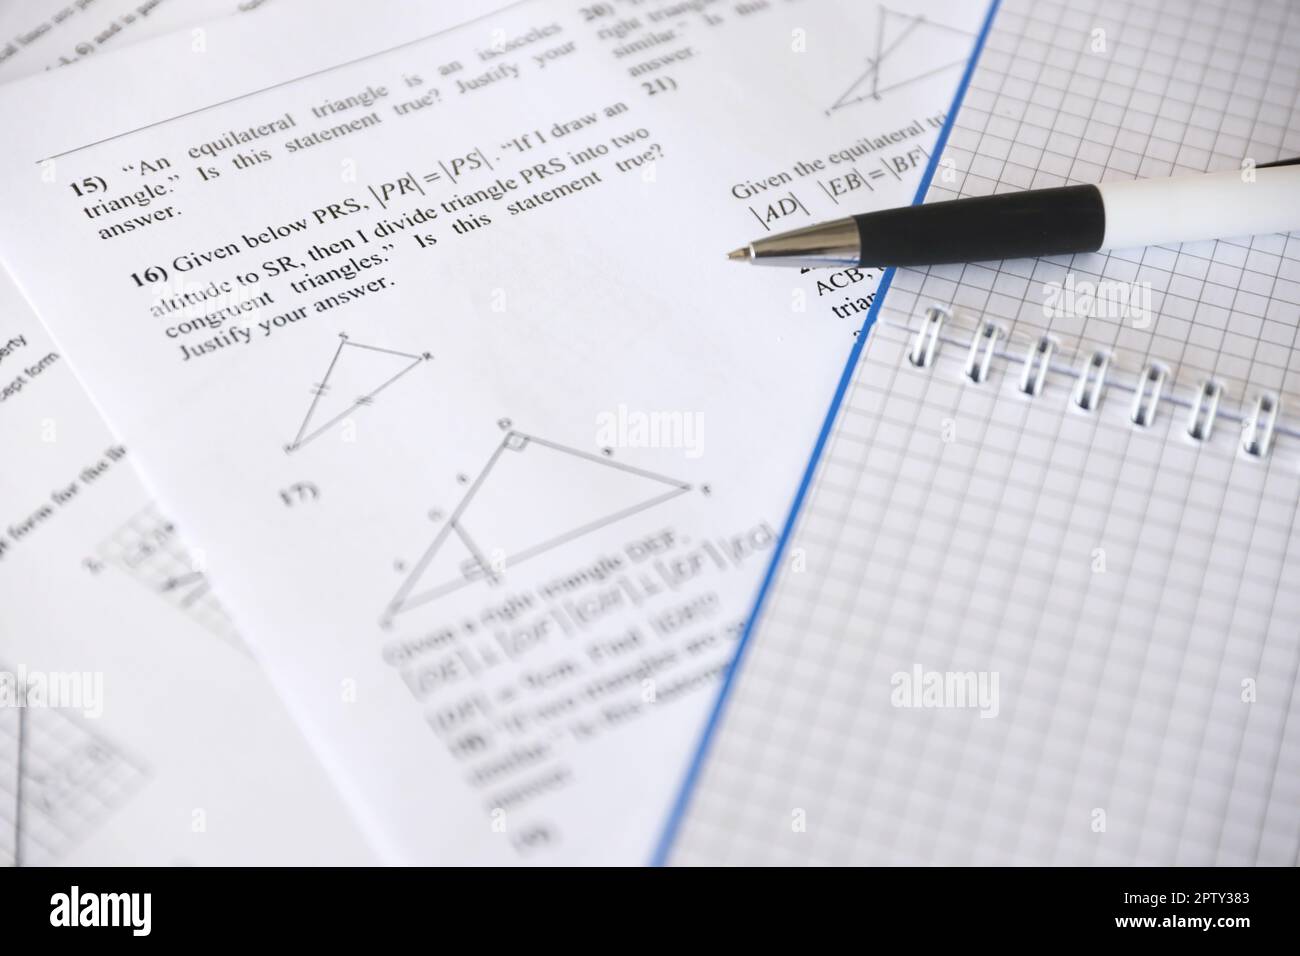 Handwriting of geometrical tasks on examination, practice, quiz or test in geometry class. Solving exponential equations background concept. Stock Photo